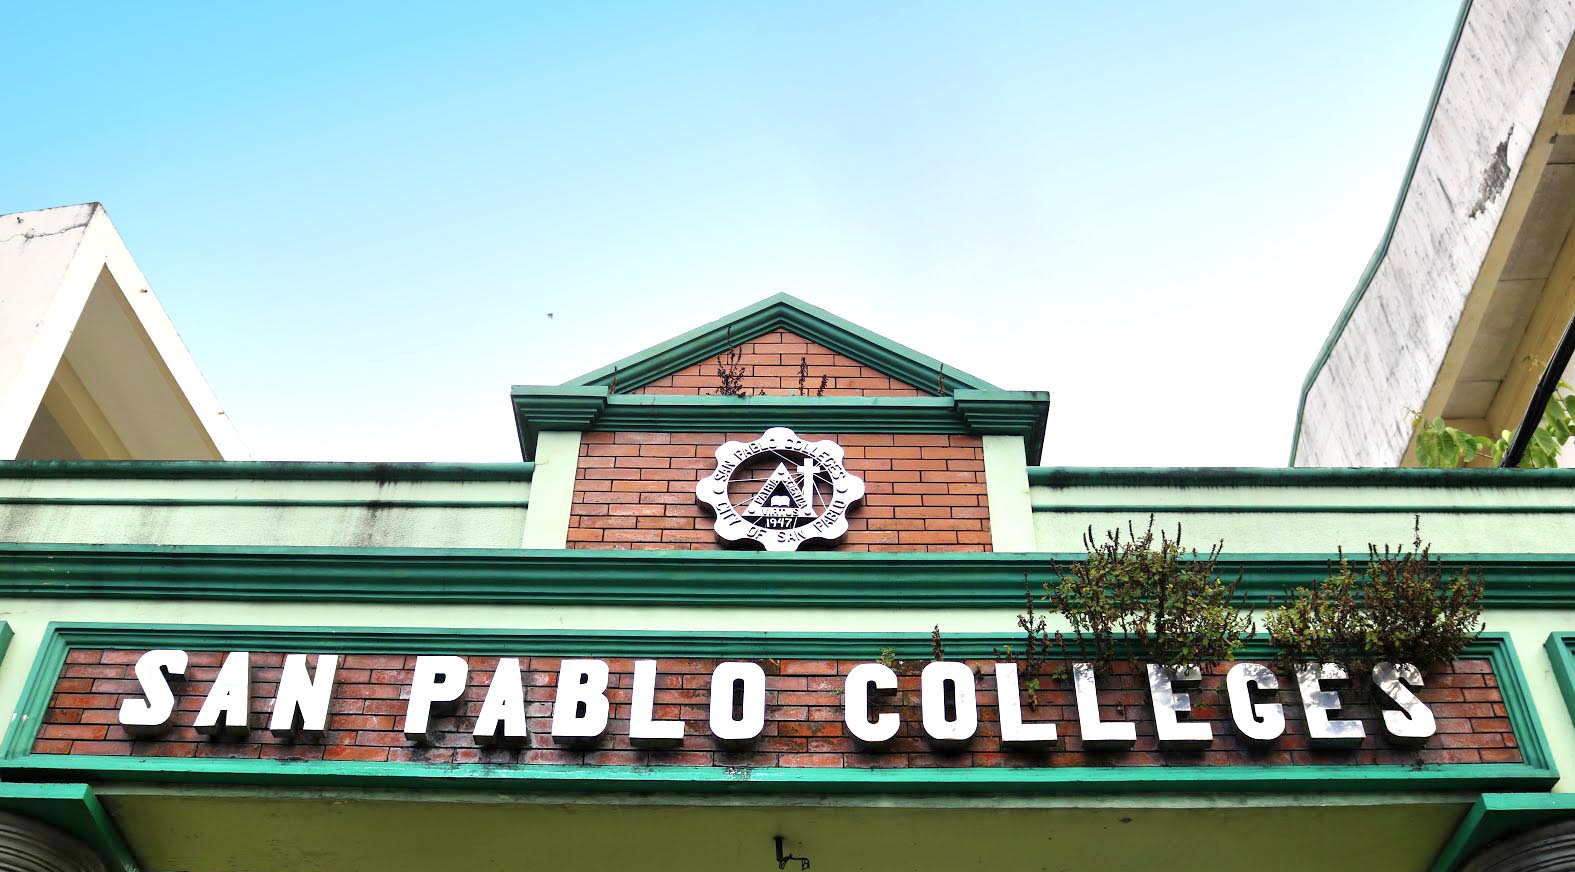 San Pablo Colleges, Inc. gets AHEAD with the help of Globe